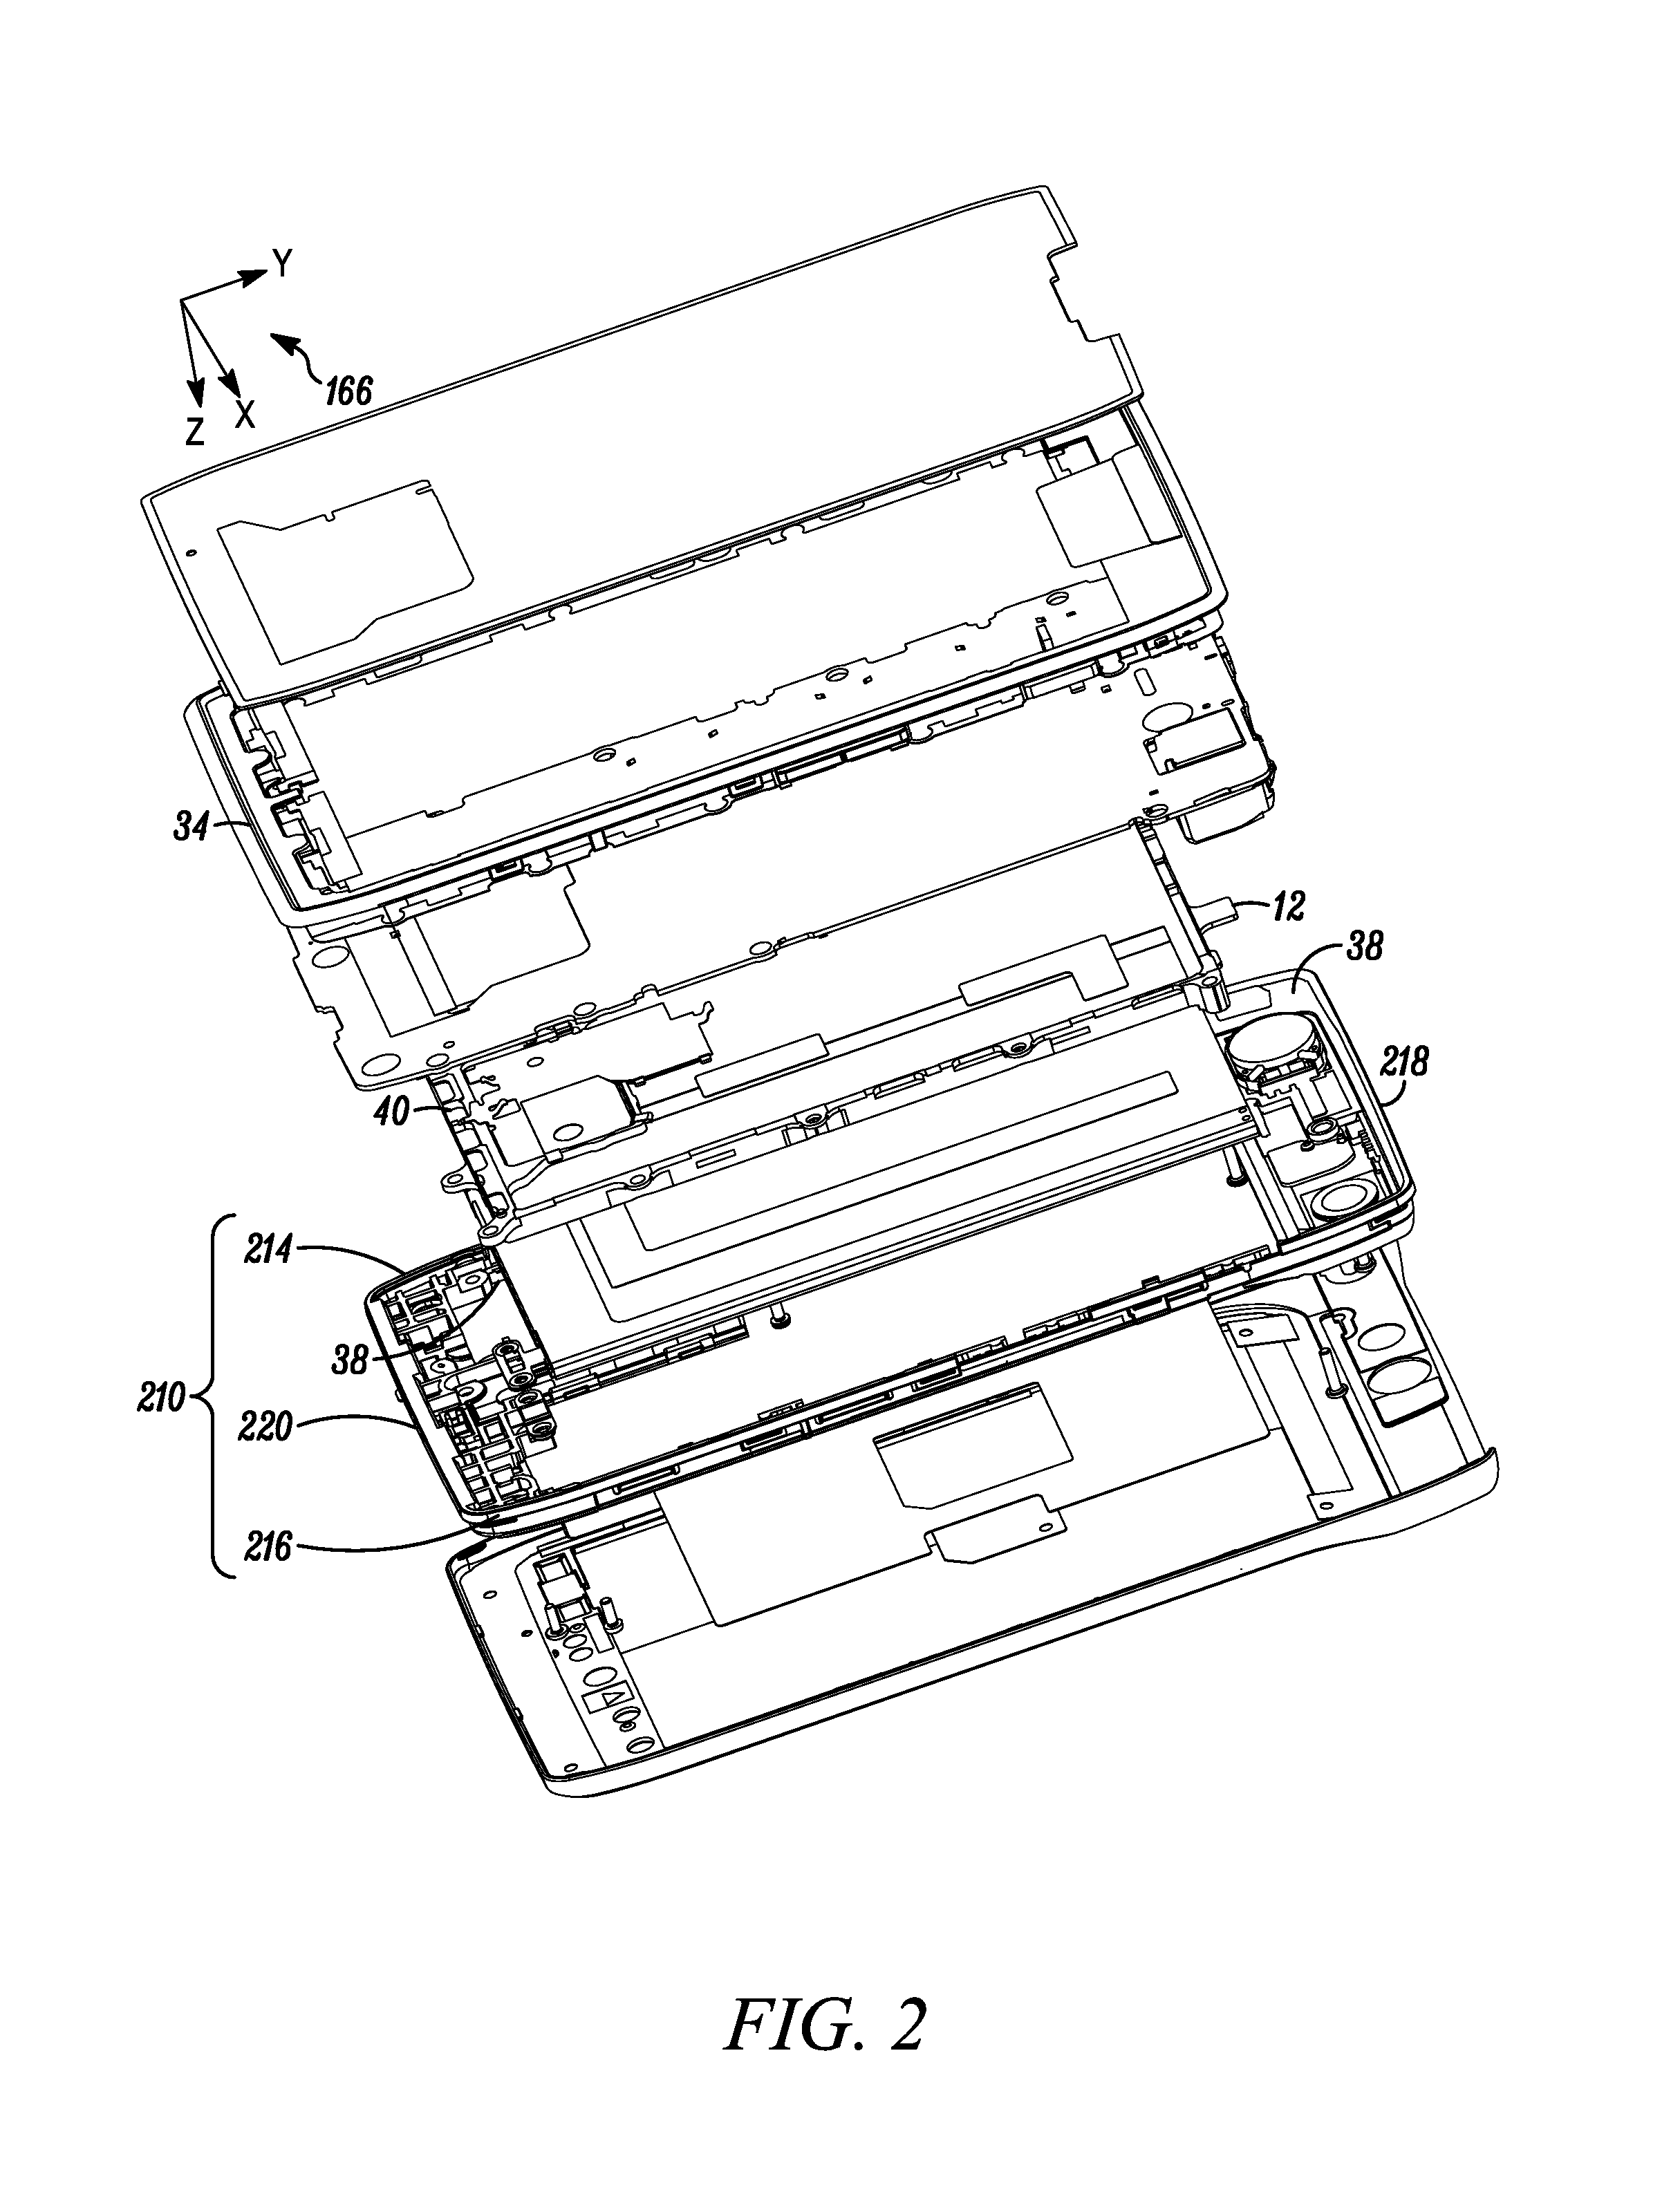 Mobile electronic device with enhanced impact mitigation